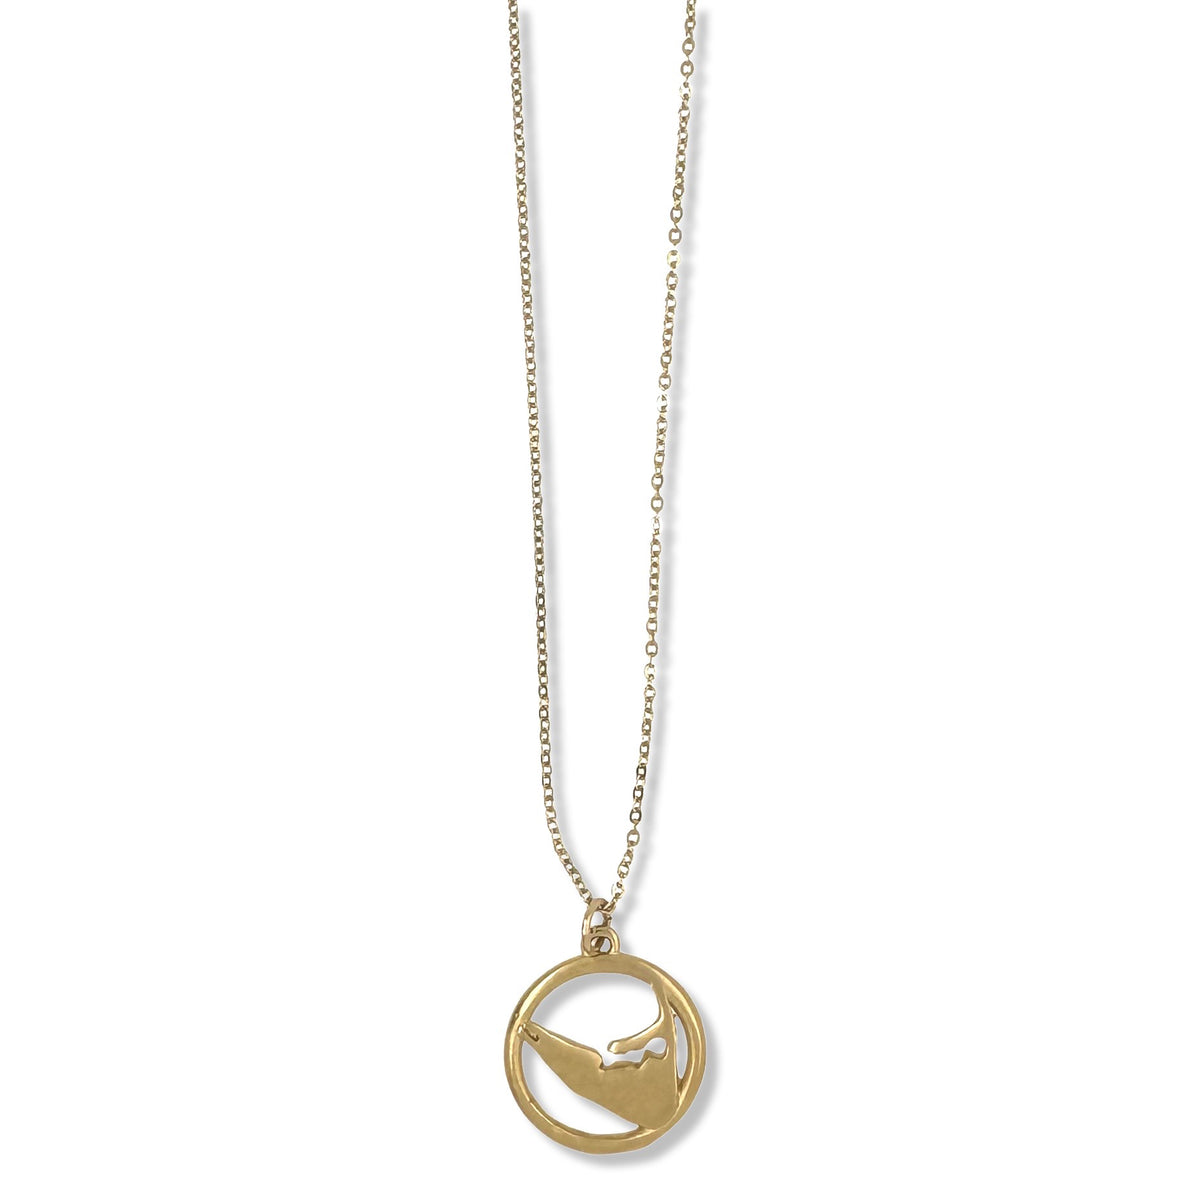 CISCO SURF NECKLACE IN GOLD